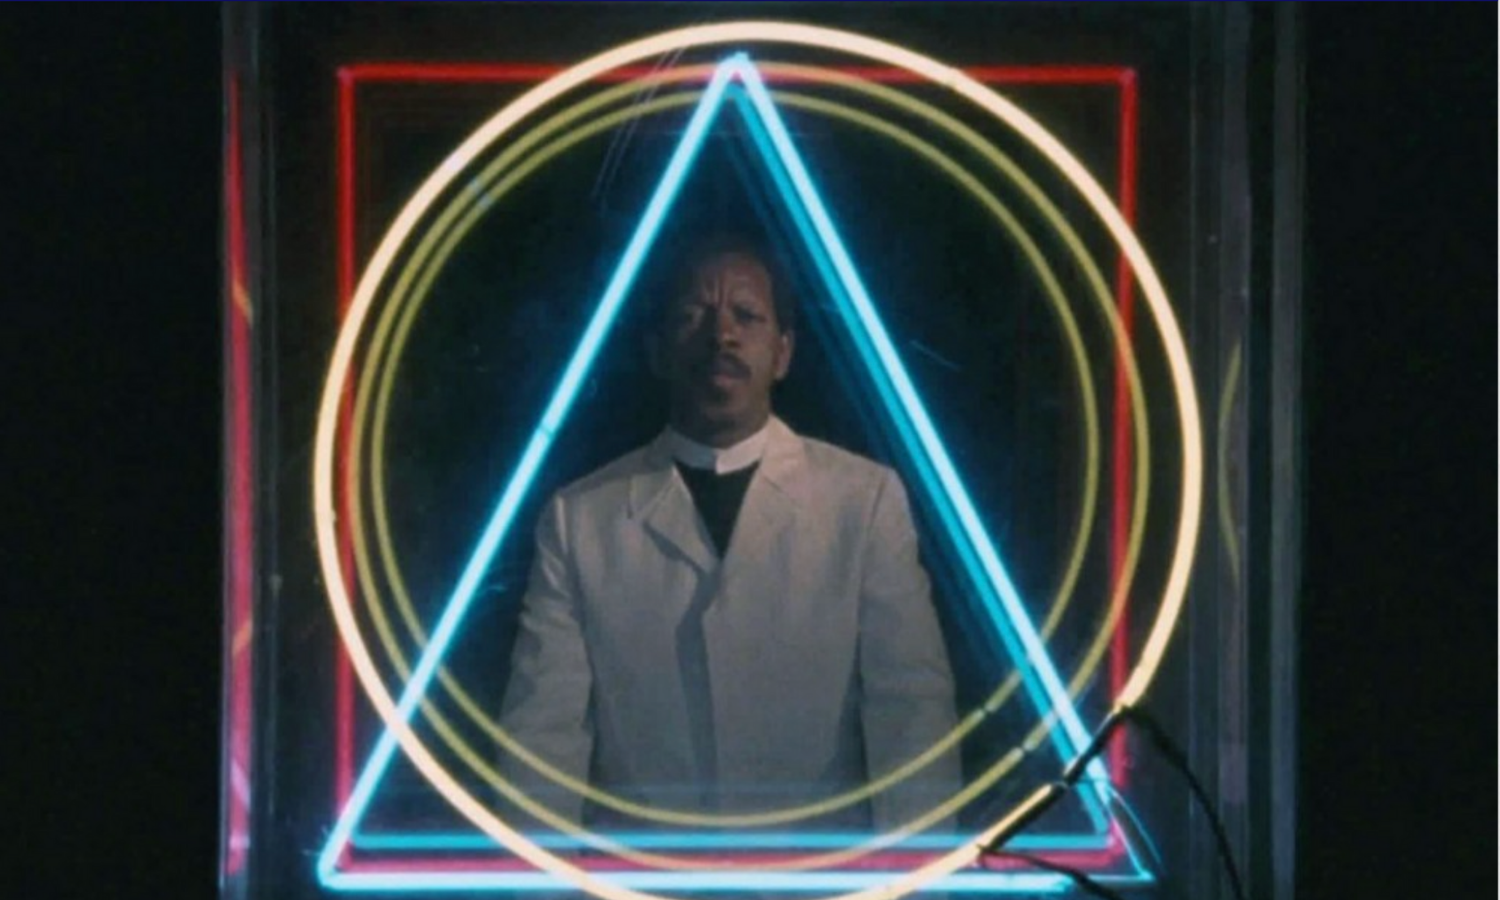 Ornette Coleman standing behind overlapping neon circles and a neon triangle.